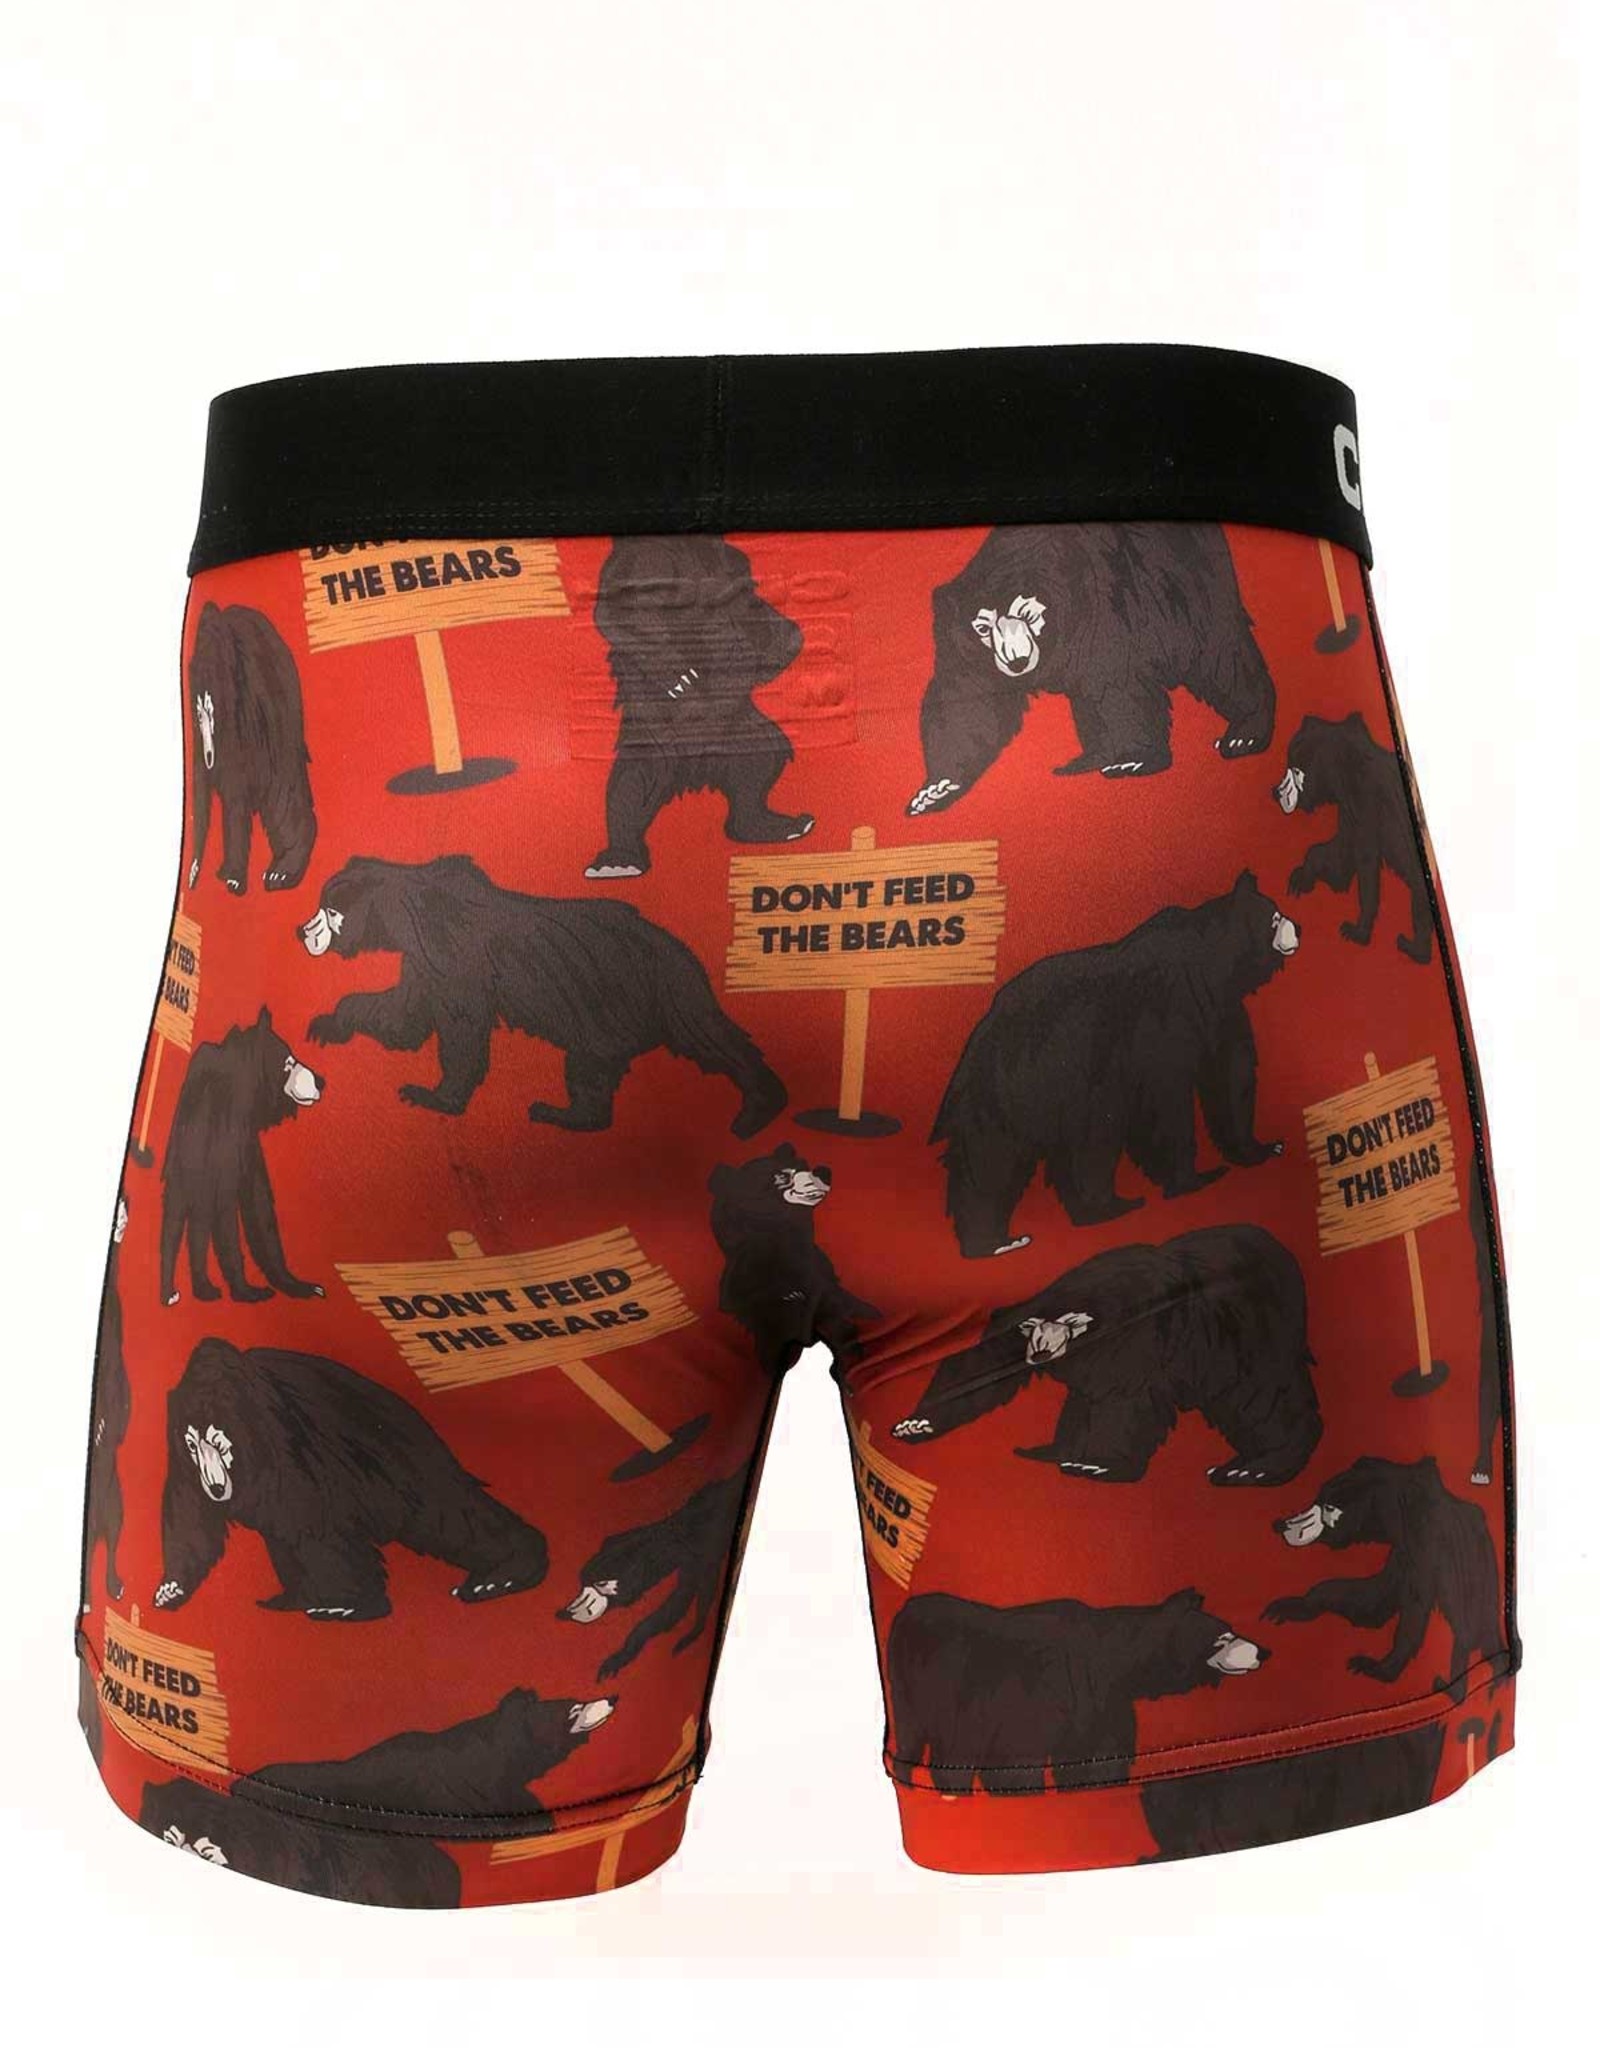 Cinch Mens Cinch Boxer Briefs 6" Don't Feed The Bears